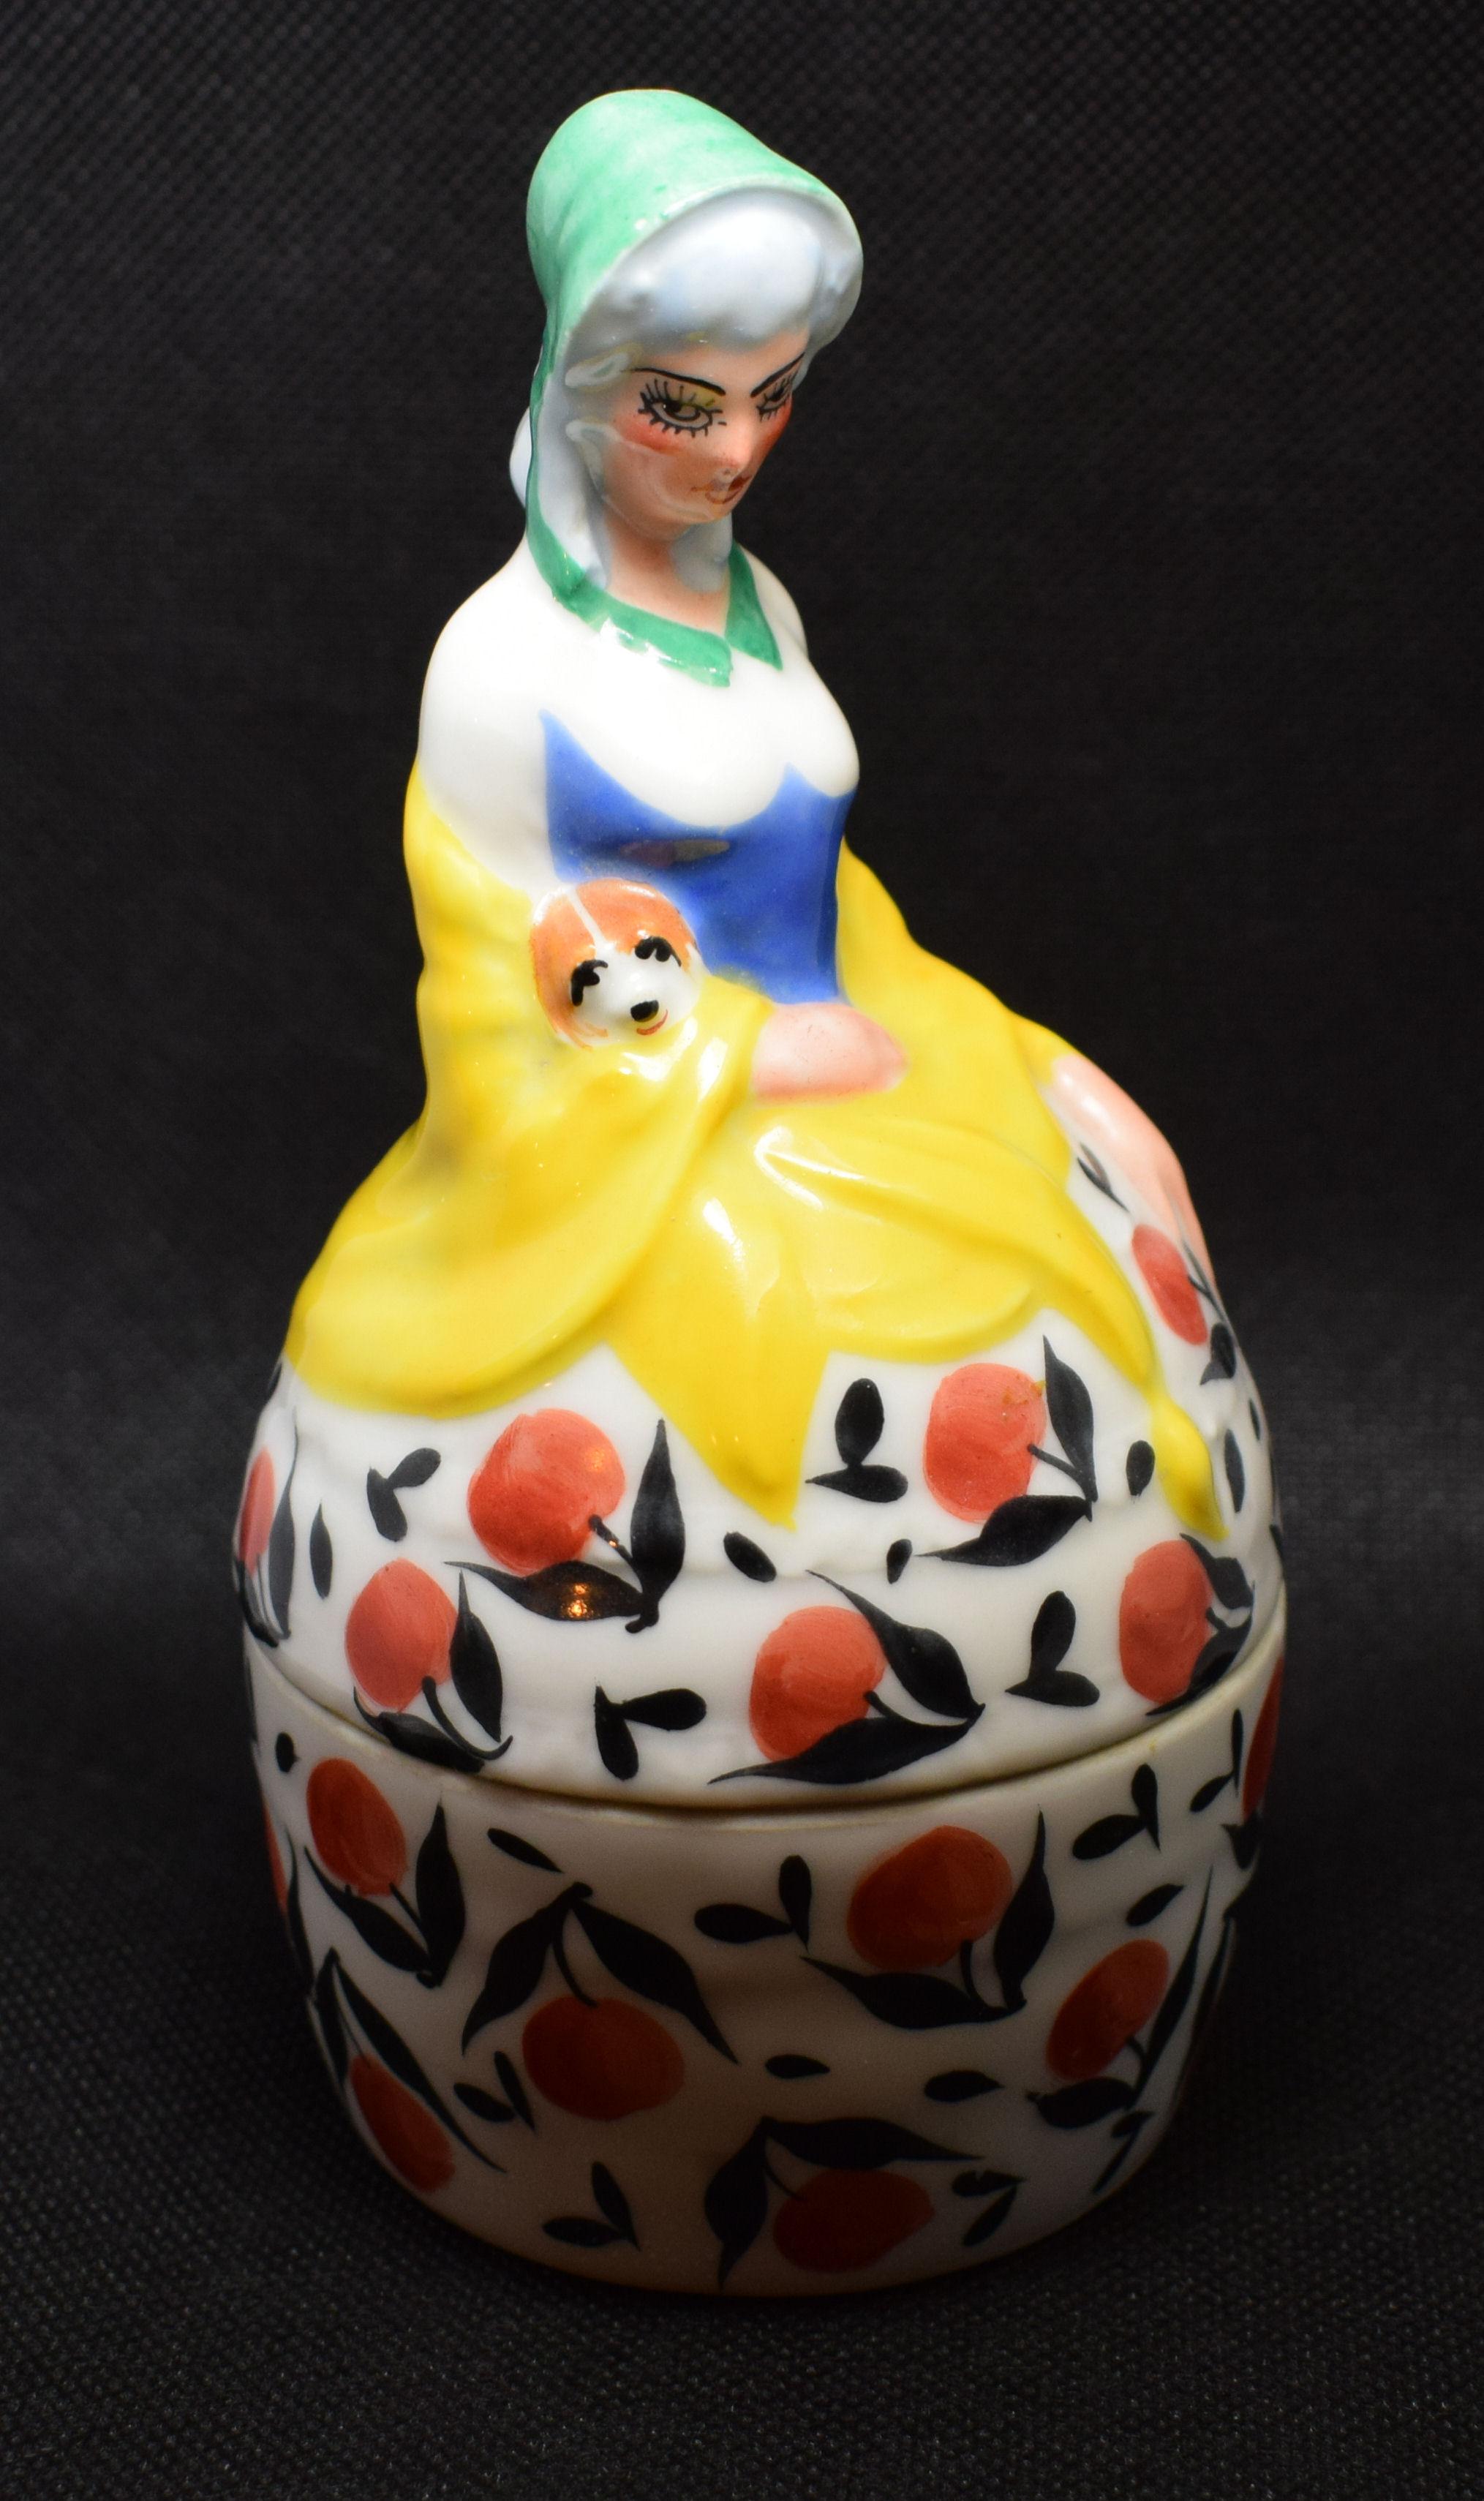 Art Deco 1930s porcelain Bonbonnière (sweet jar). Very beautiful and authentic candy jars in beautiful vibrant colouring. Signed to the base Paradis, made in France. A great piece with multiple applications aside from it's original intent. Condition